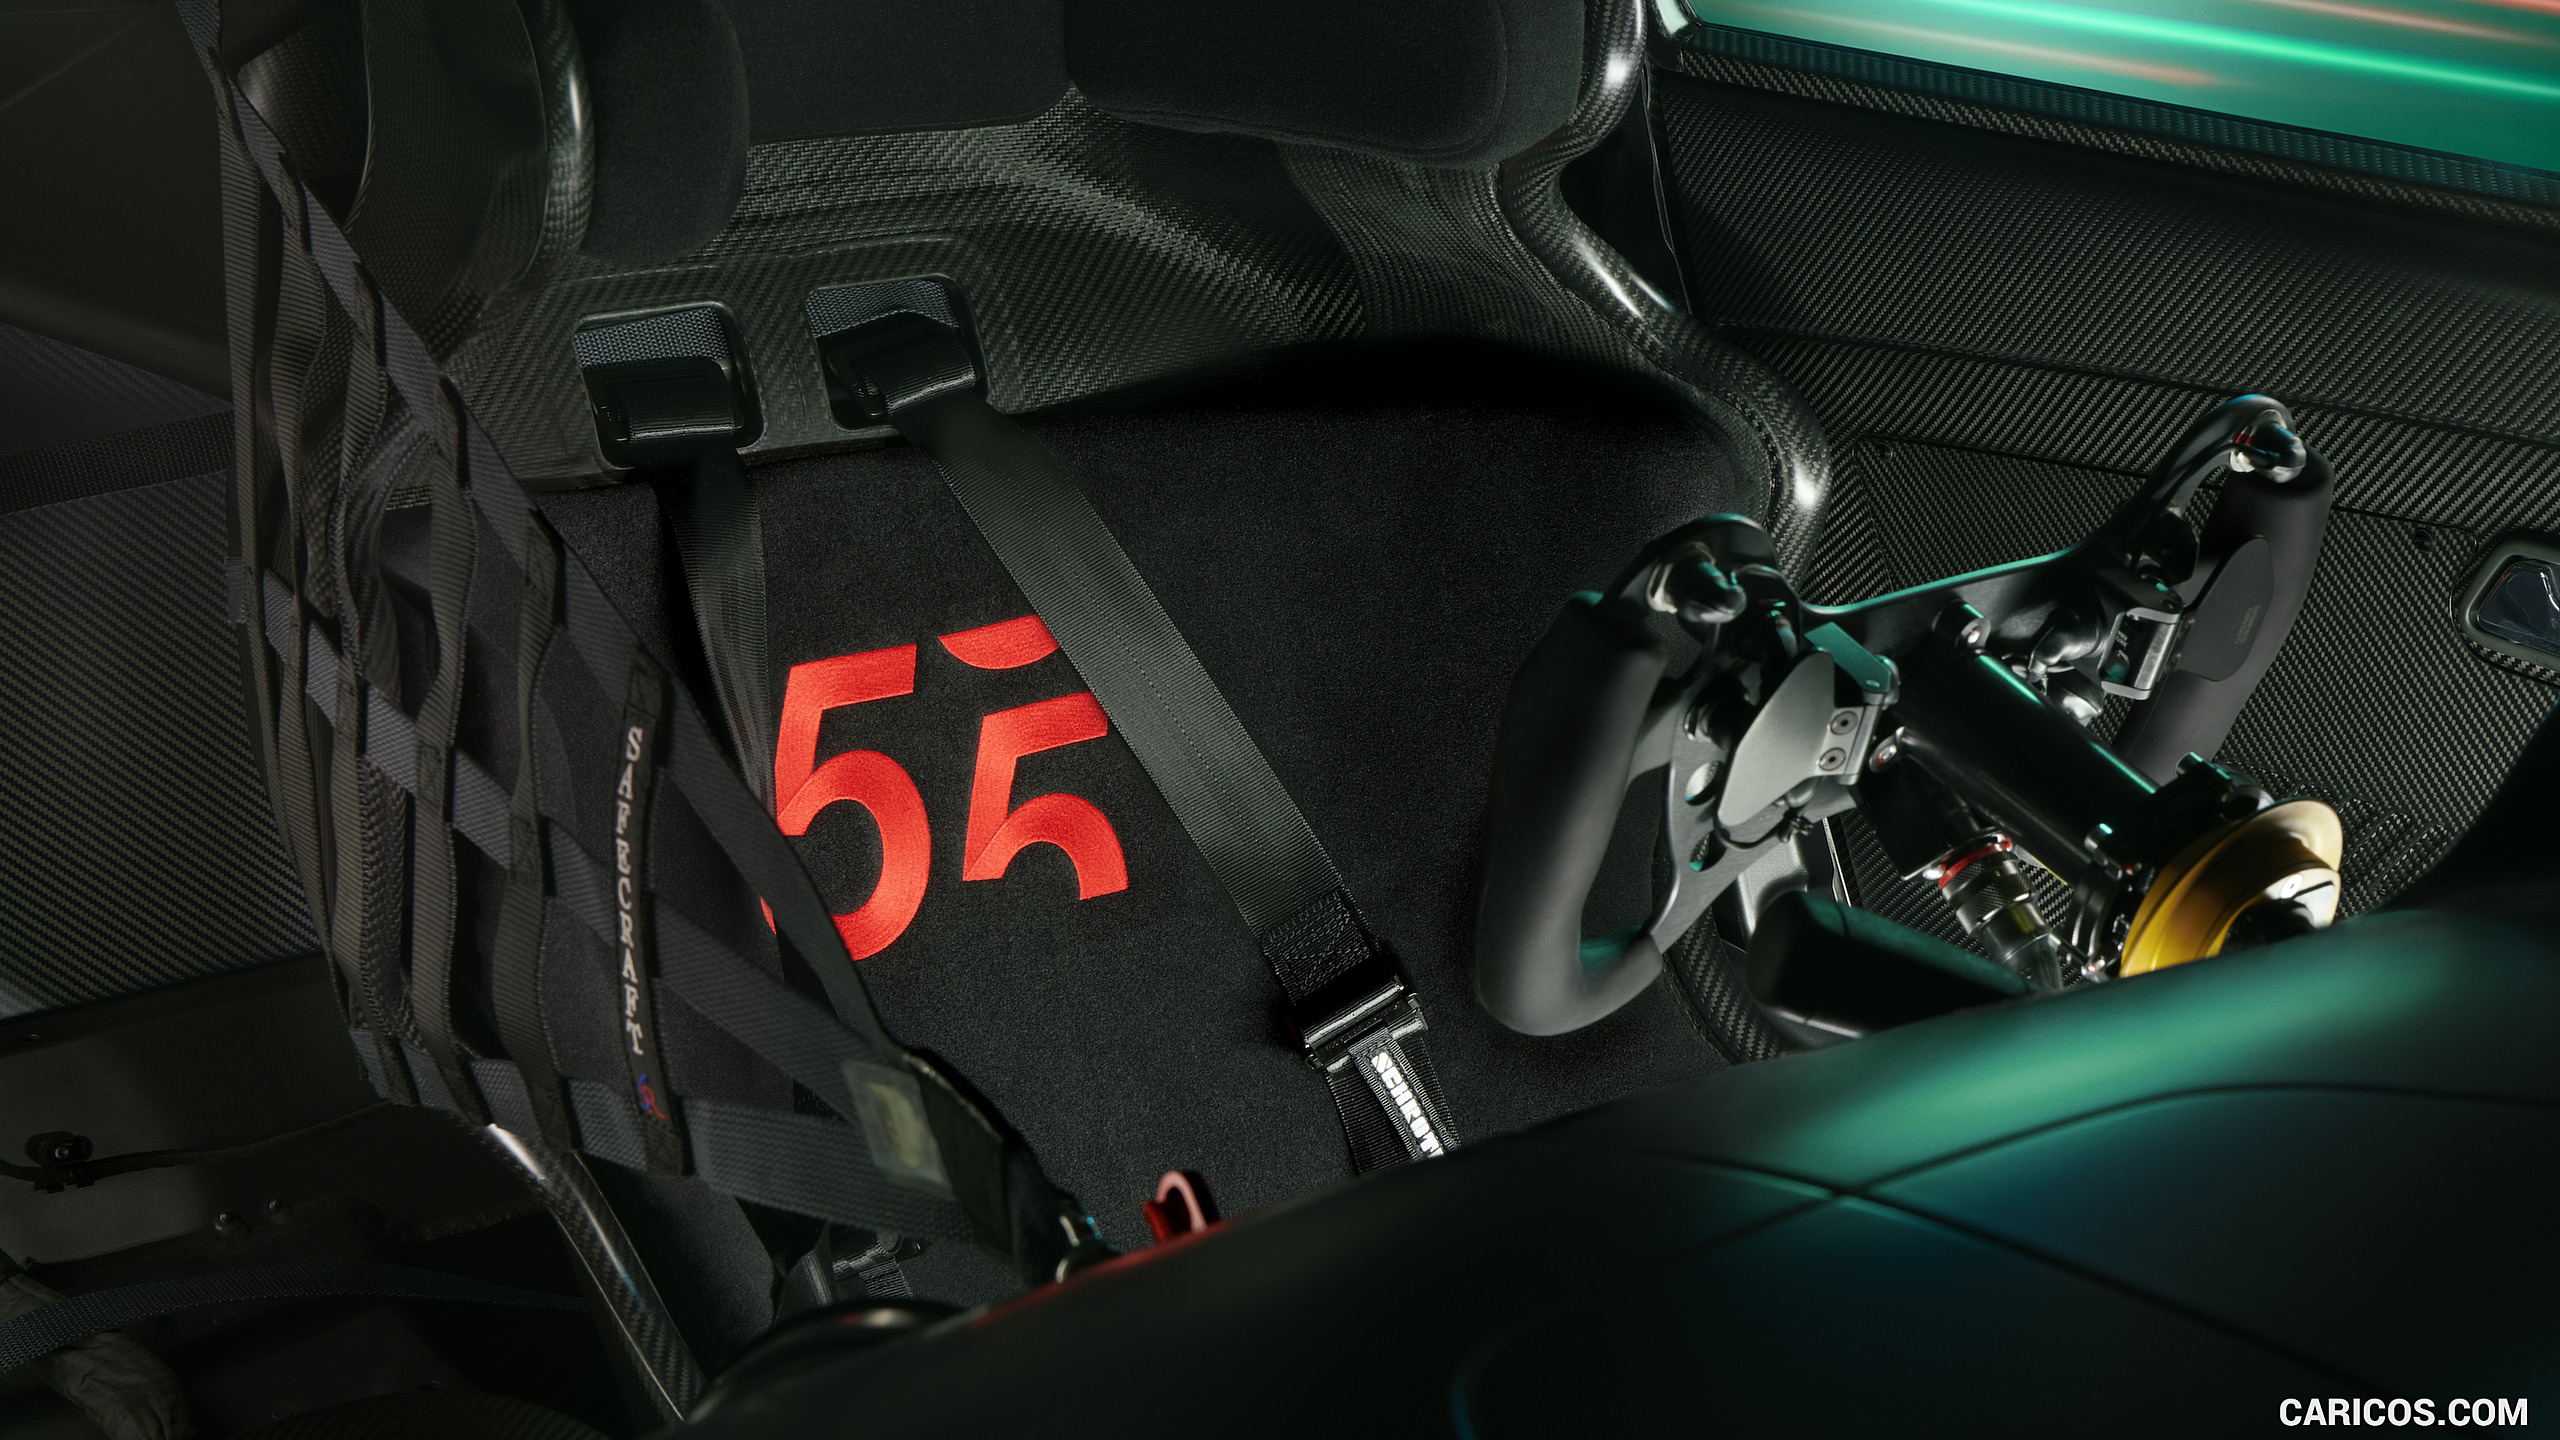 2023 Mercedes-AMG GT3 Edition 55 - Interior, Detail, #7 of 7